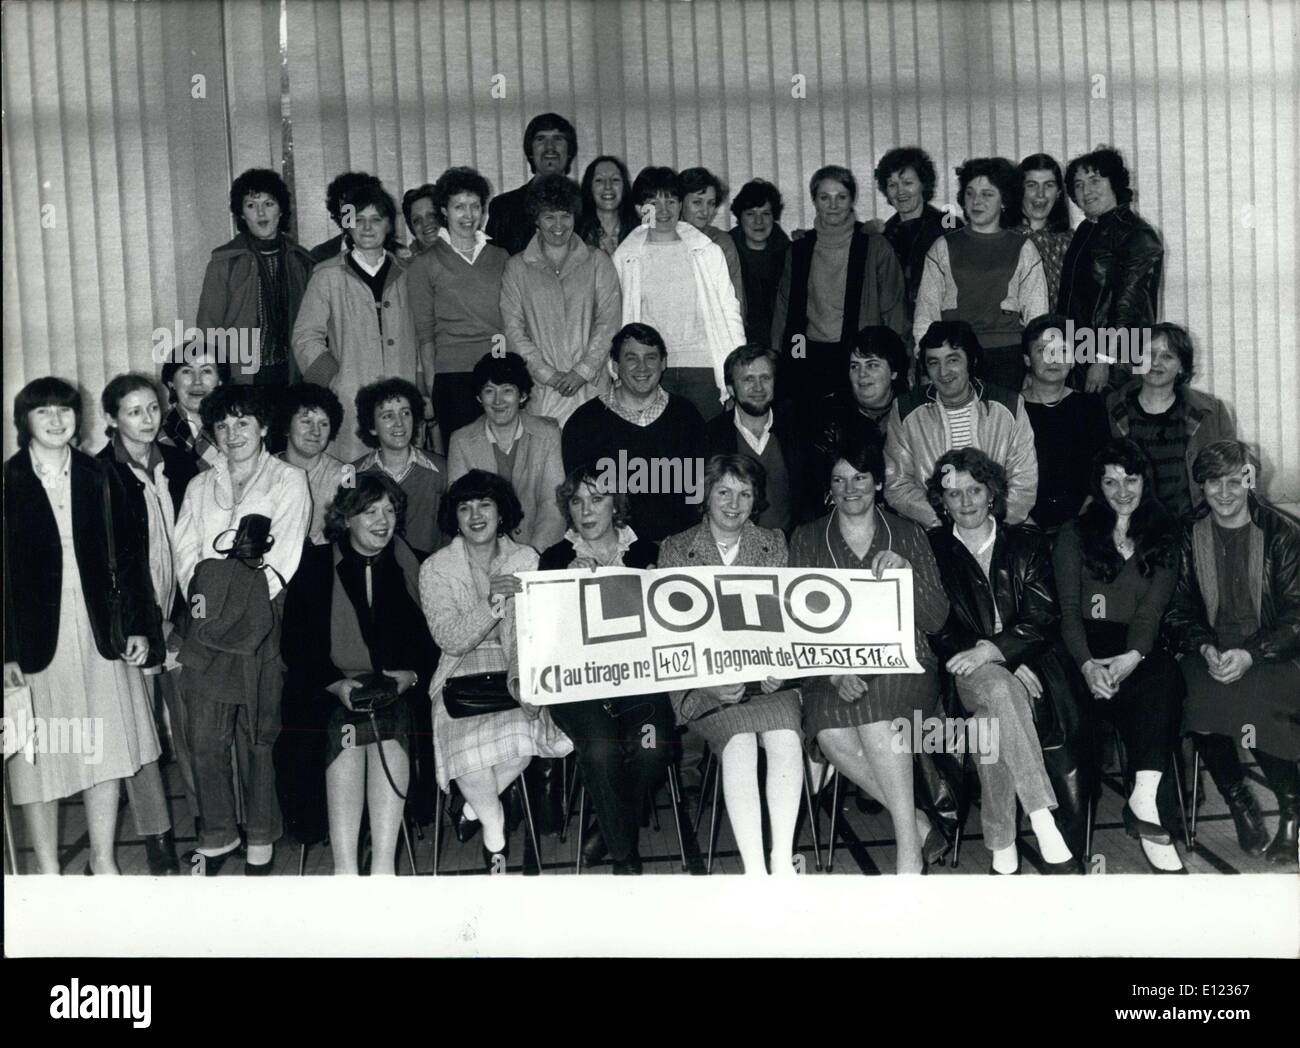 Jan. 16, 1984 - About 40 people working in the Moulinex Factory have been playing the lottery since December, always using the same numbers. On Friday January 13th 1984 their perseverance was rewarded. The winners get to share a formidable sum of 12,368,658 francs. Stock Photo